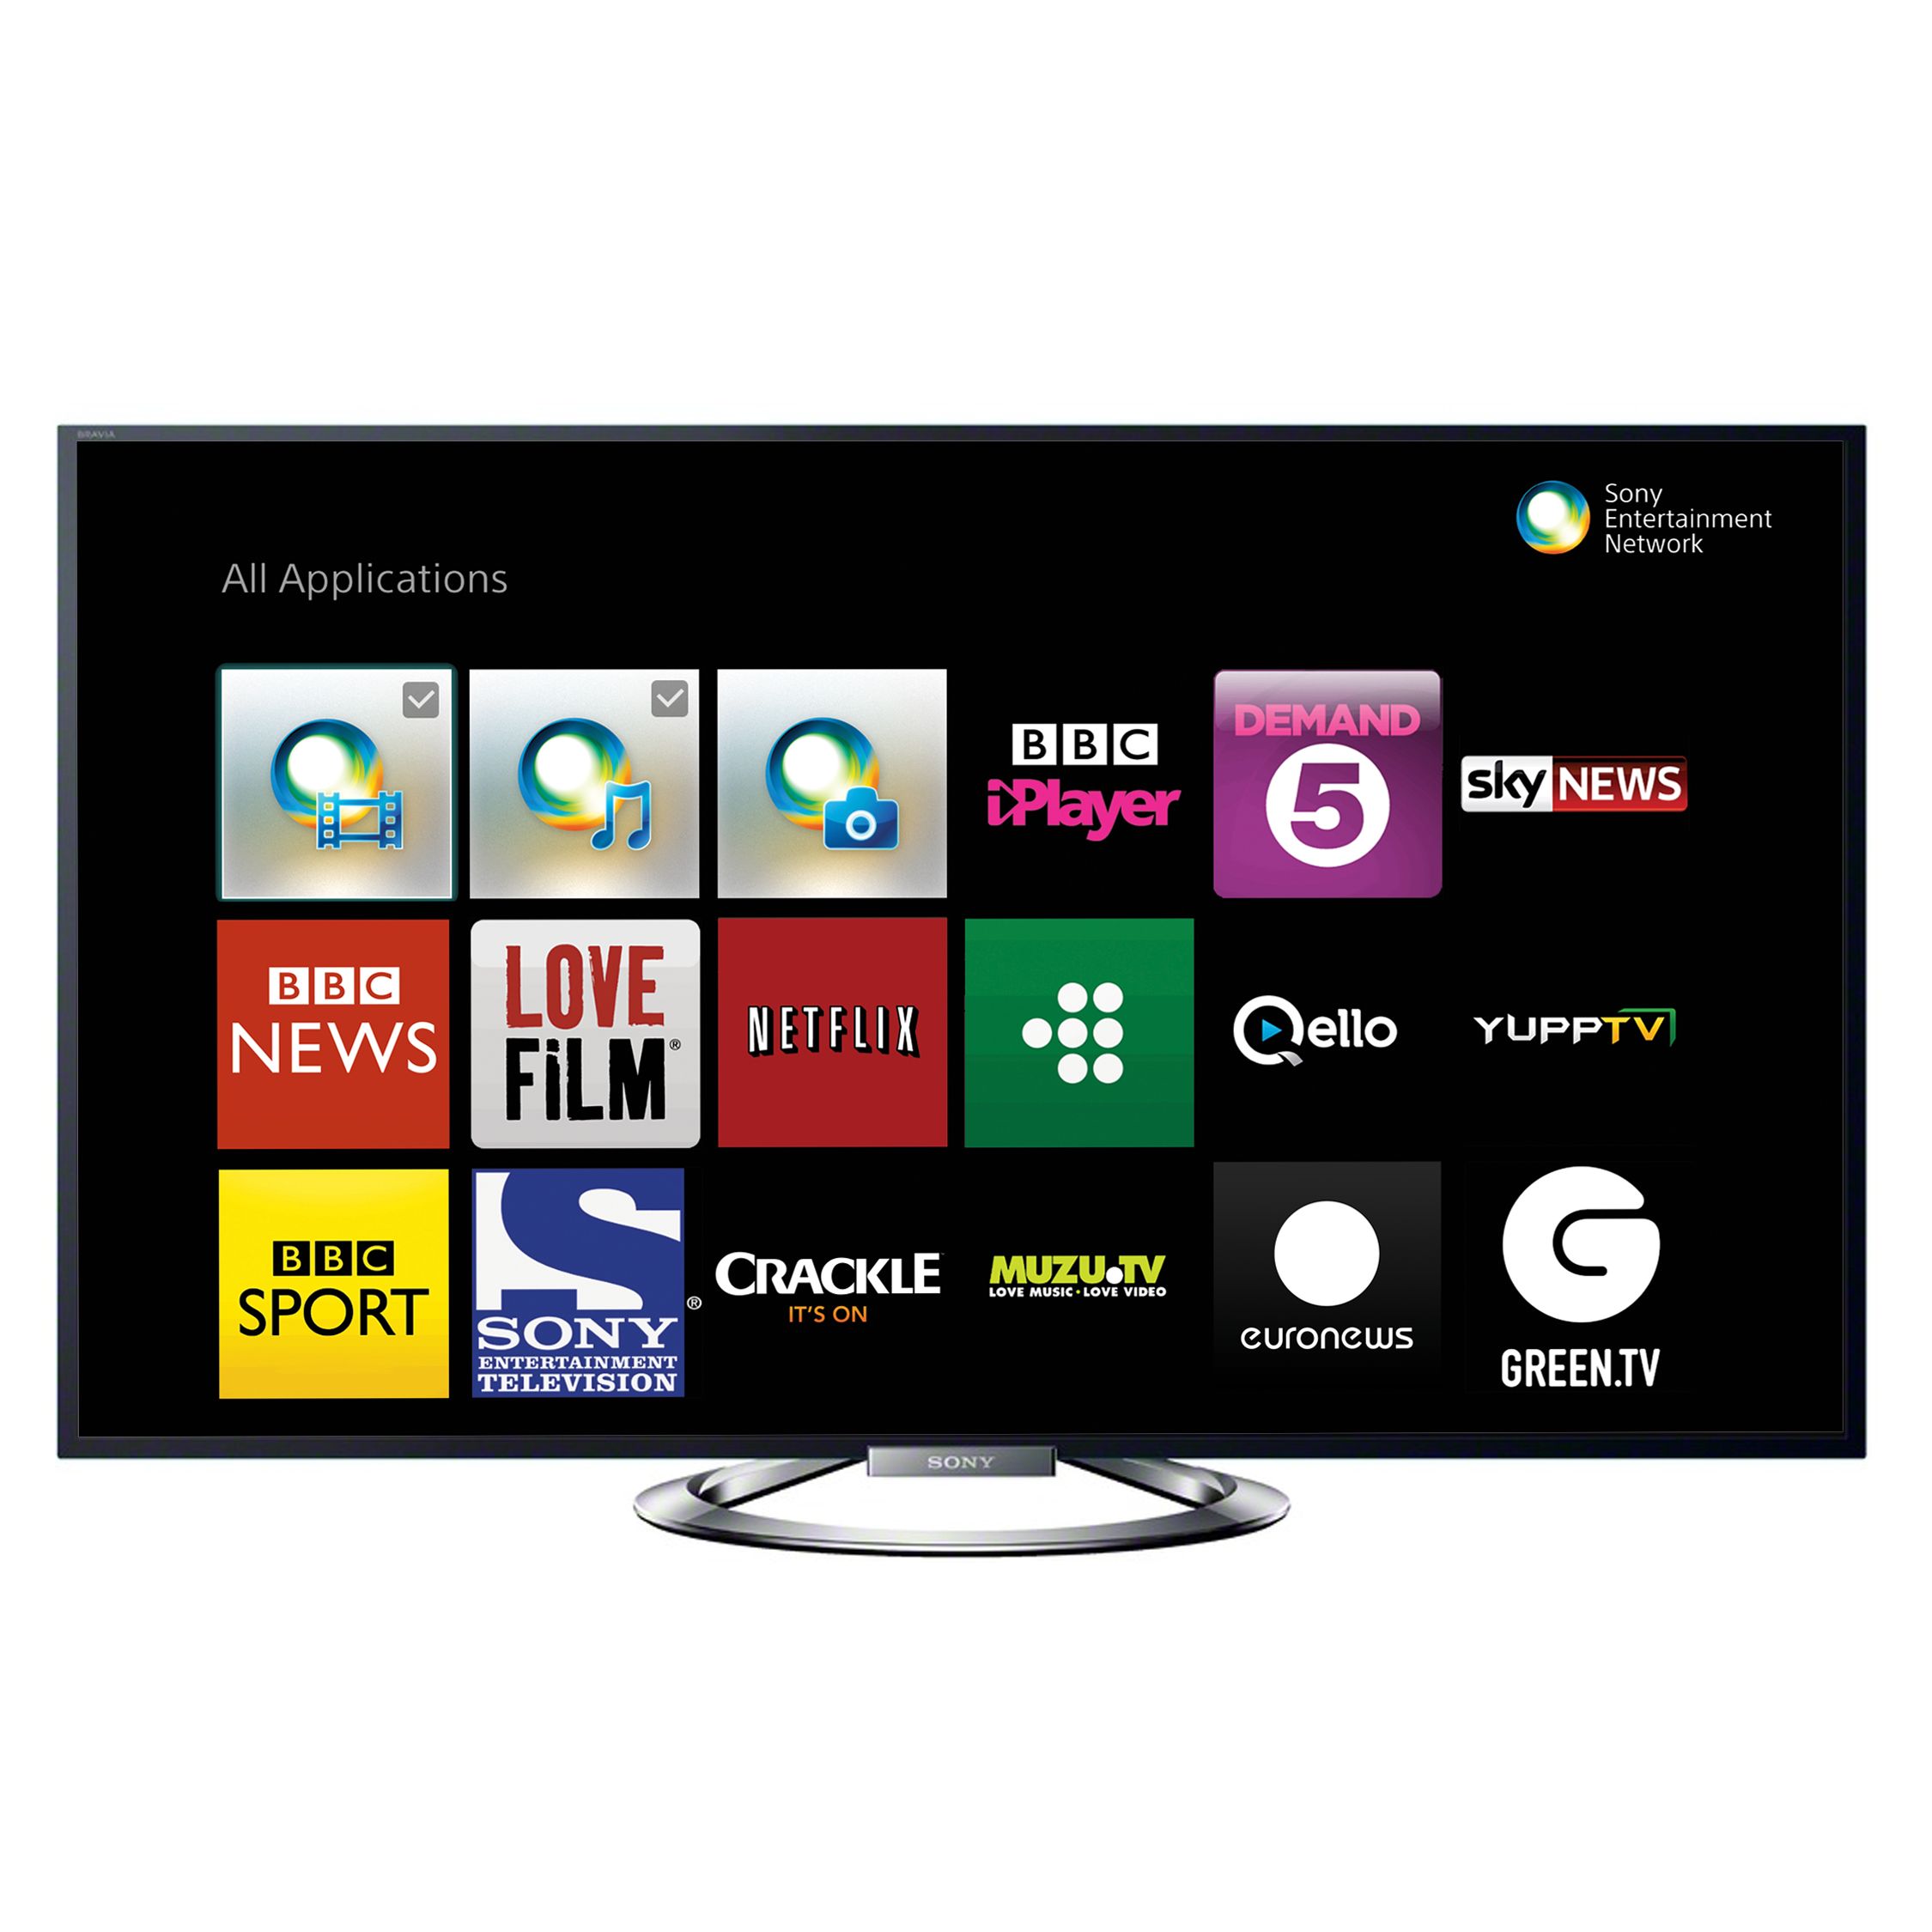 Sony Bravia KDL46W905ABU LED HD 1080p 3D Smart TV, 46 Inch, NFC with Freeview HD and 4x 3D Glasses